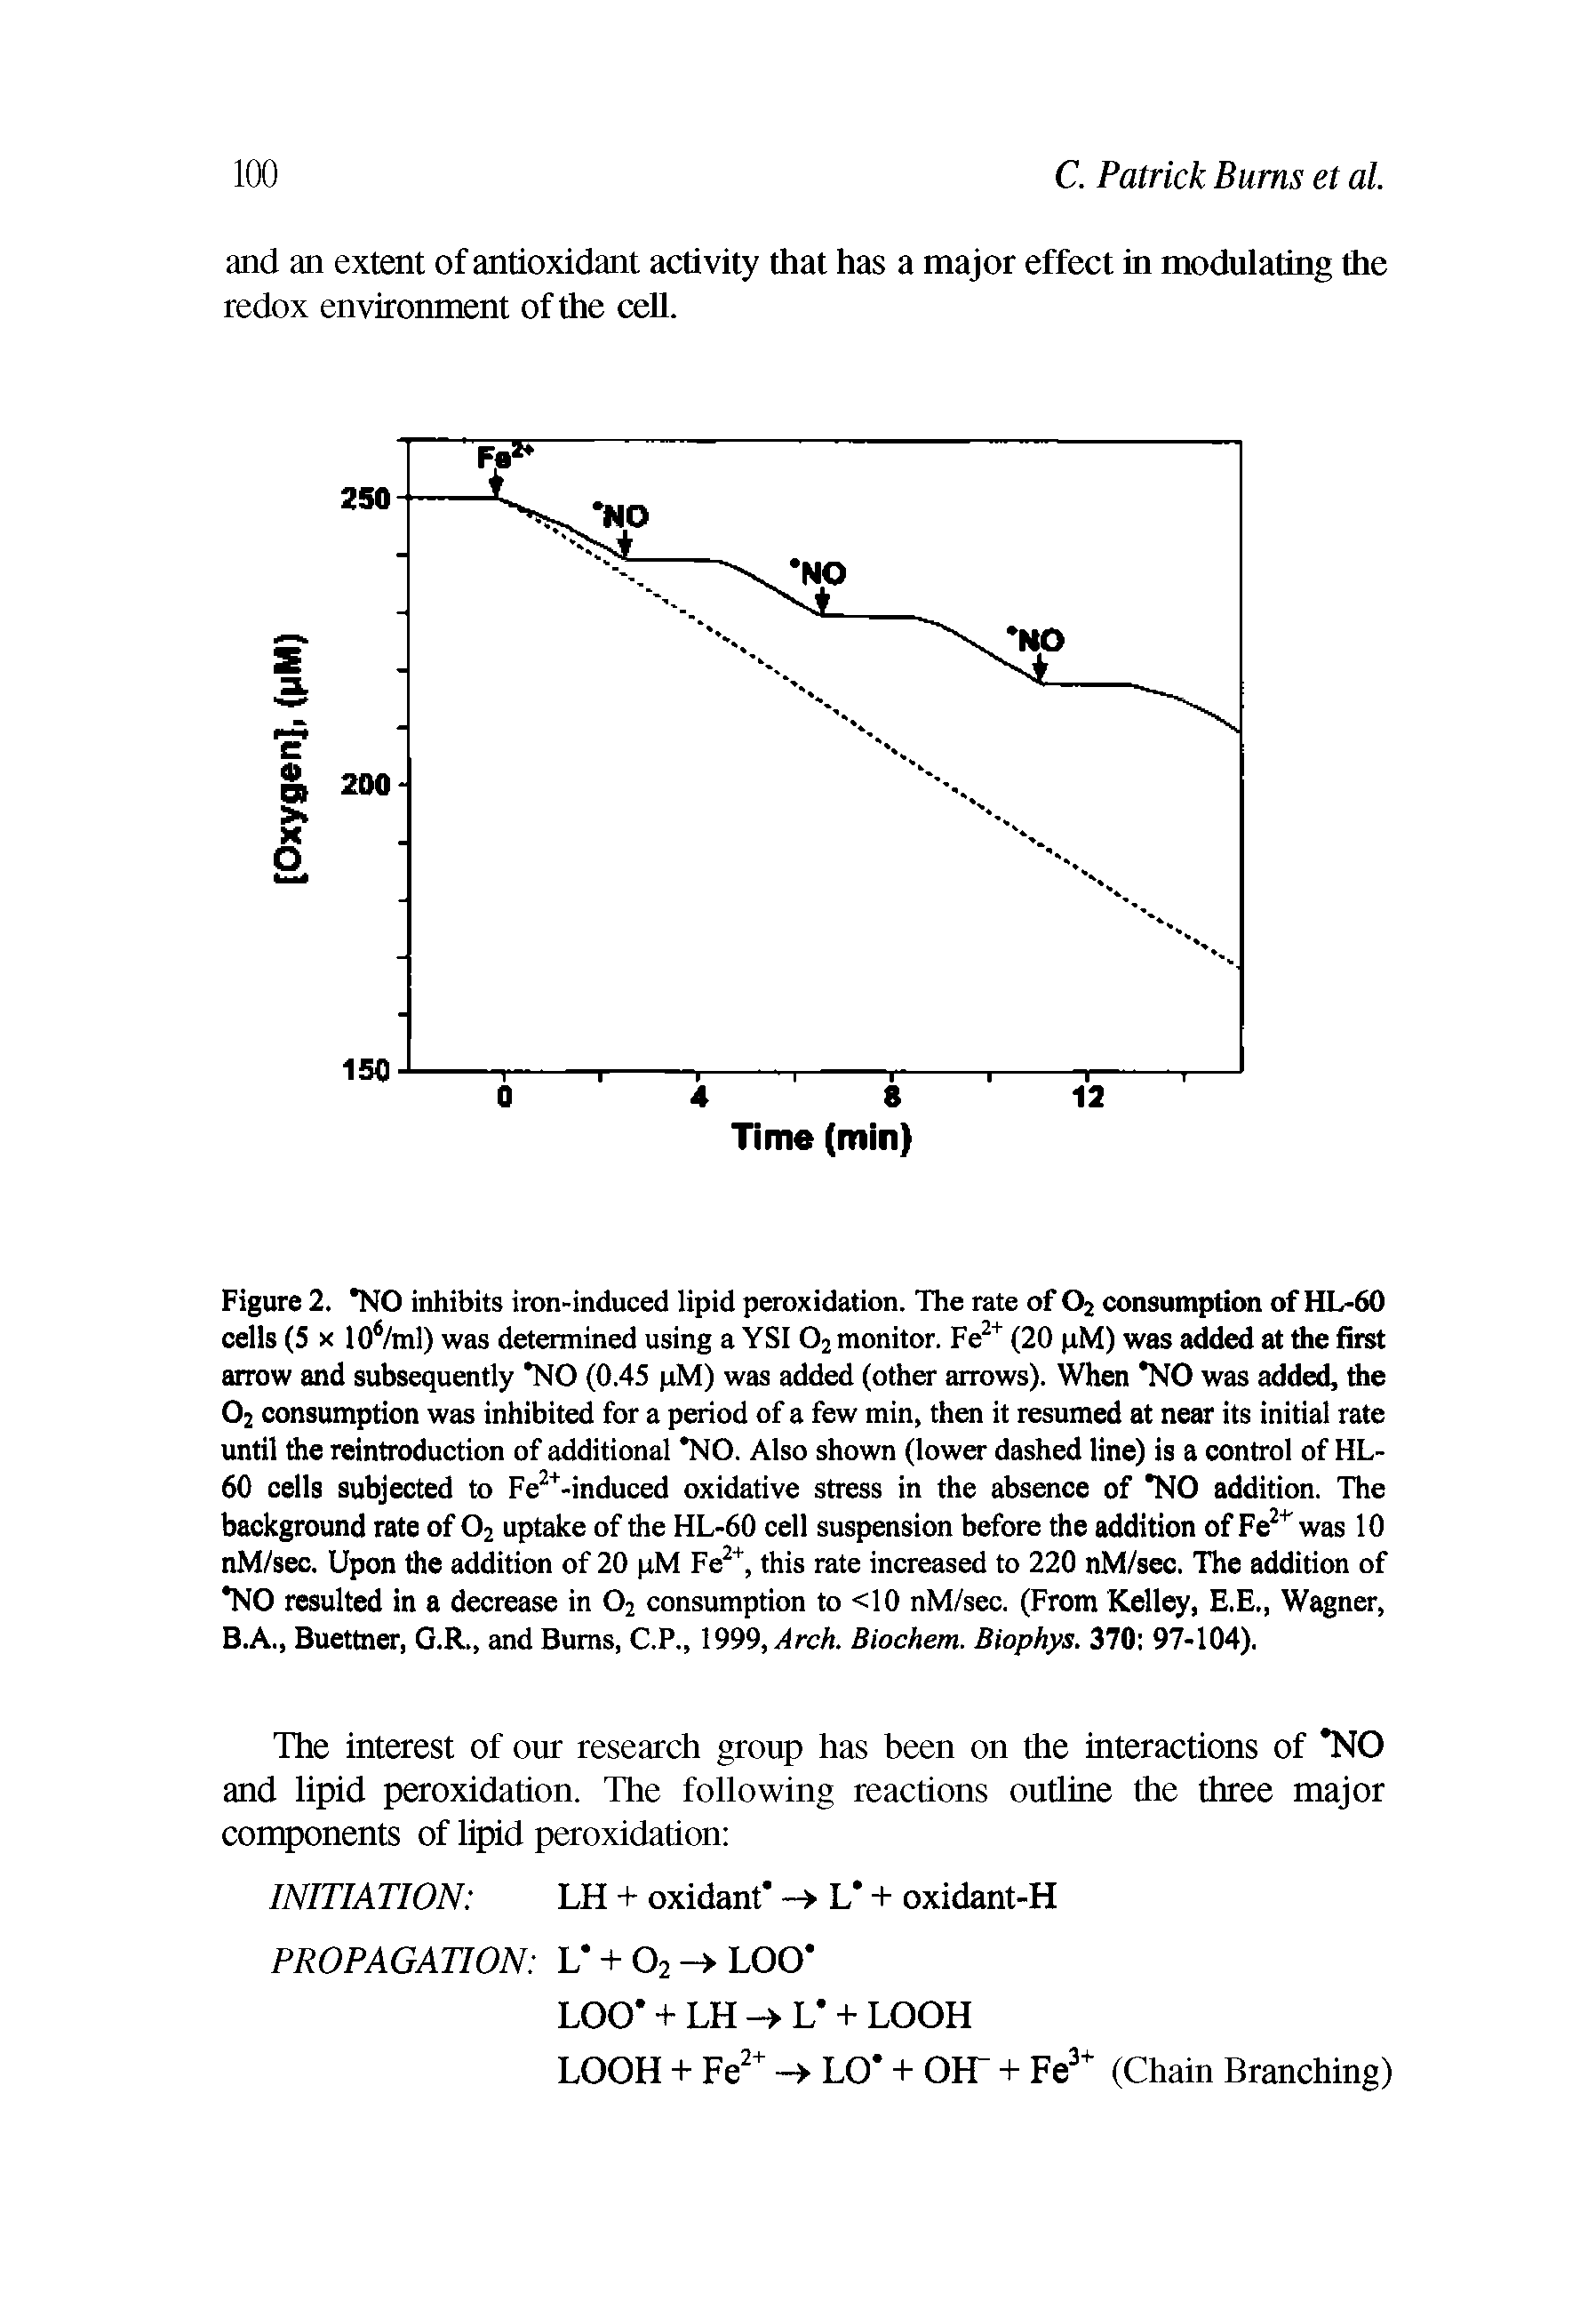 Figure 2. NO inhibits iron-induced lipid peroxidation. The rate of Oj consumption of HL-60 cells (5 X 10 /ml) was detennined using a YSI O2 monitor. Fe (20 pM) was added at the first arrow and subsequently NO (0.45 pM) was added (other arrows). When NO was added, the O2 consumption was inhibited for a period of a few min, then it resumed at near its initial rate until the reintroduction of additional NO. Also shown (lower dashed line) is a control of HL-60 cells subjected to Fe -induced oxidative stress in the absence of NO addition. The background rate of O2 uptake of the HL-60 cell suspension before the addition of Fe was 10 nM/sec. Upon the addition of 20 pM Fe, this rate increased to 220 nM/sec. The addition of NO resulted in a decrease in O2 consumption to <10 nM/sec. (From Kelley, E.E., Wagner, B.A., Buettner, G.R., and Bums, C.P., 1999, Arch. Biochem. Biophys. 370 97-104).